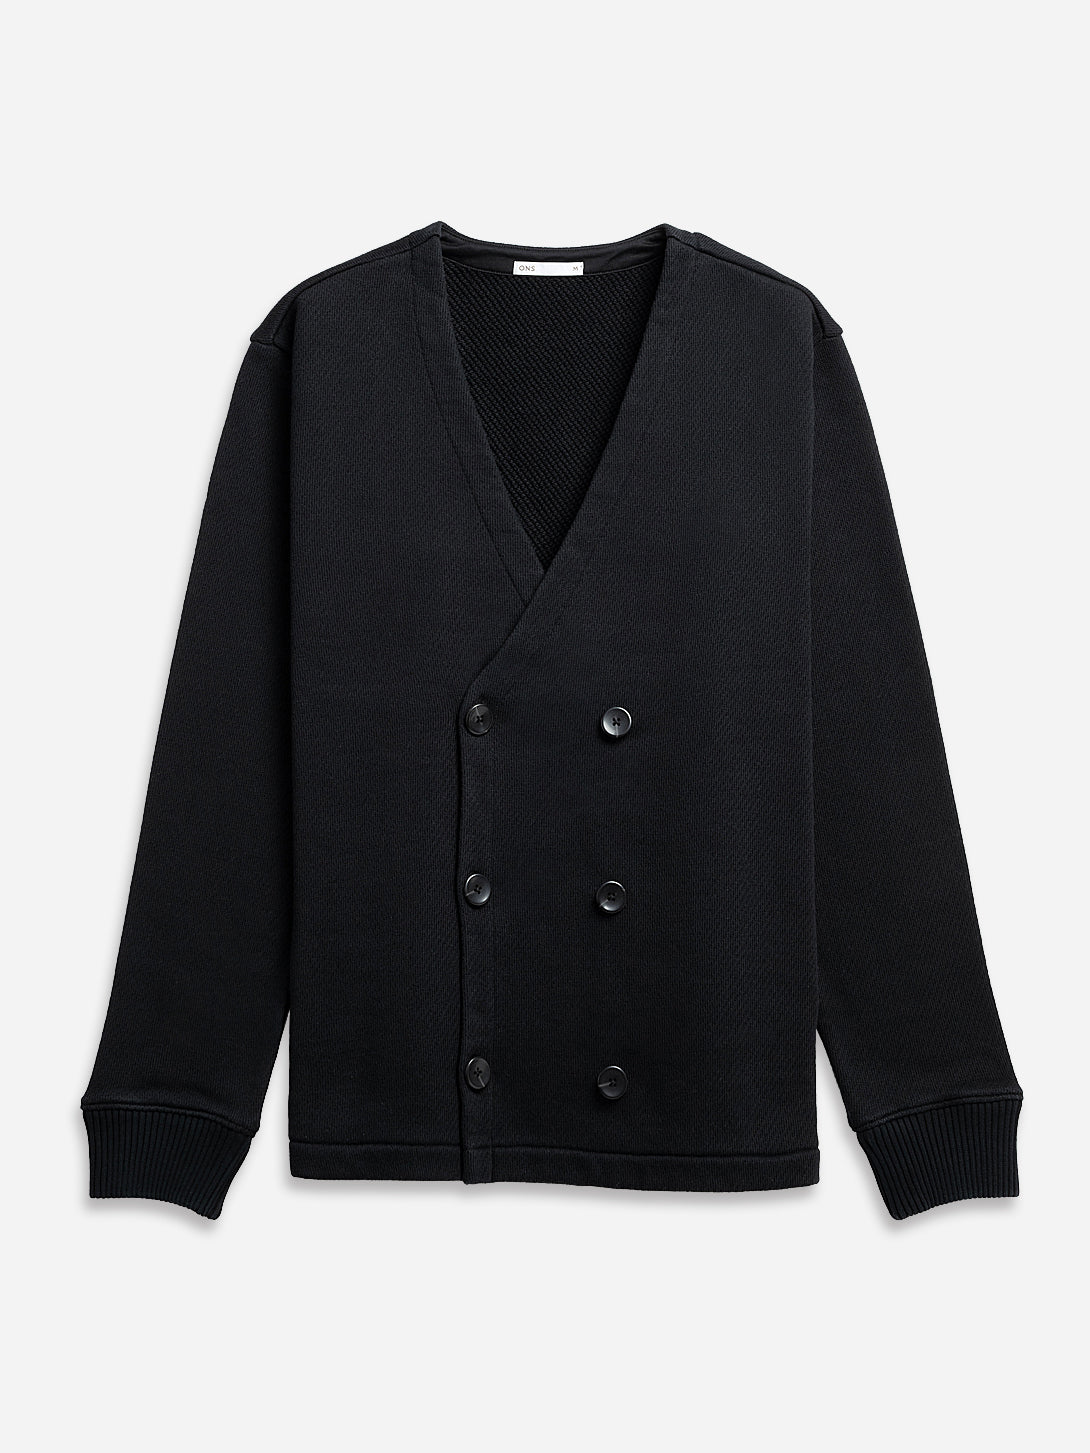 Black Button Jesup Double Breasted Terry Knit Mens Cardigan Jacket